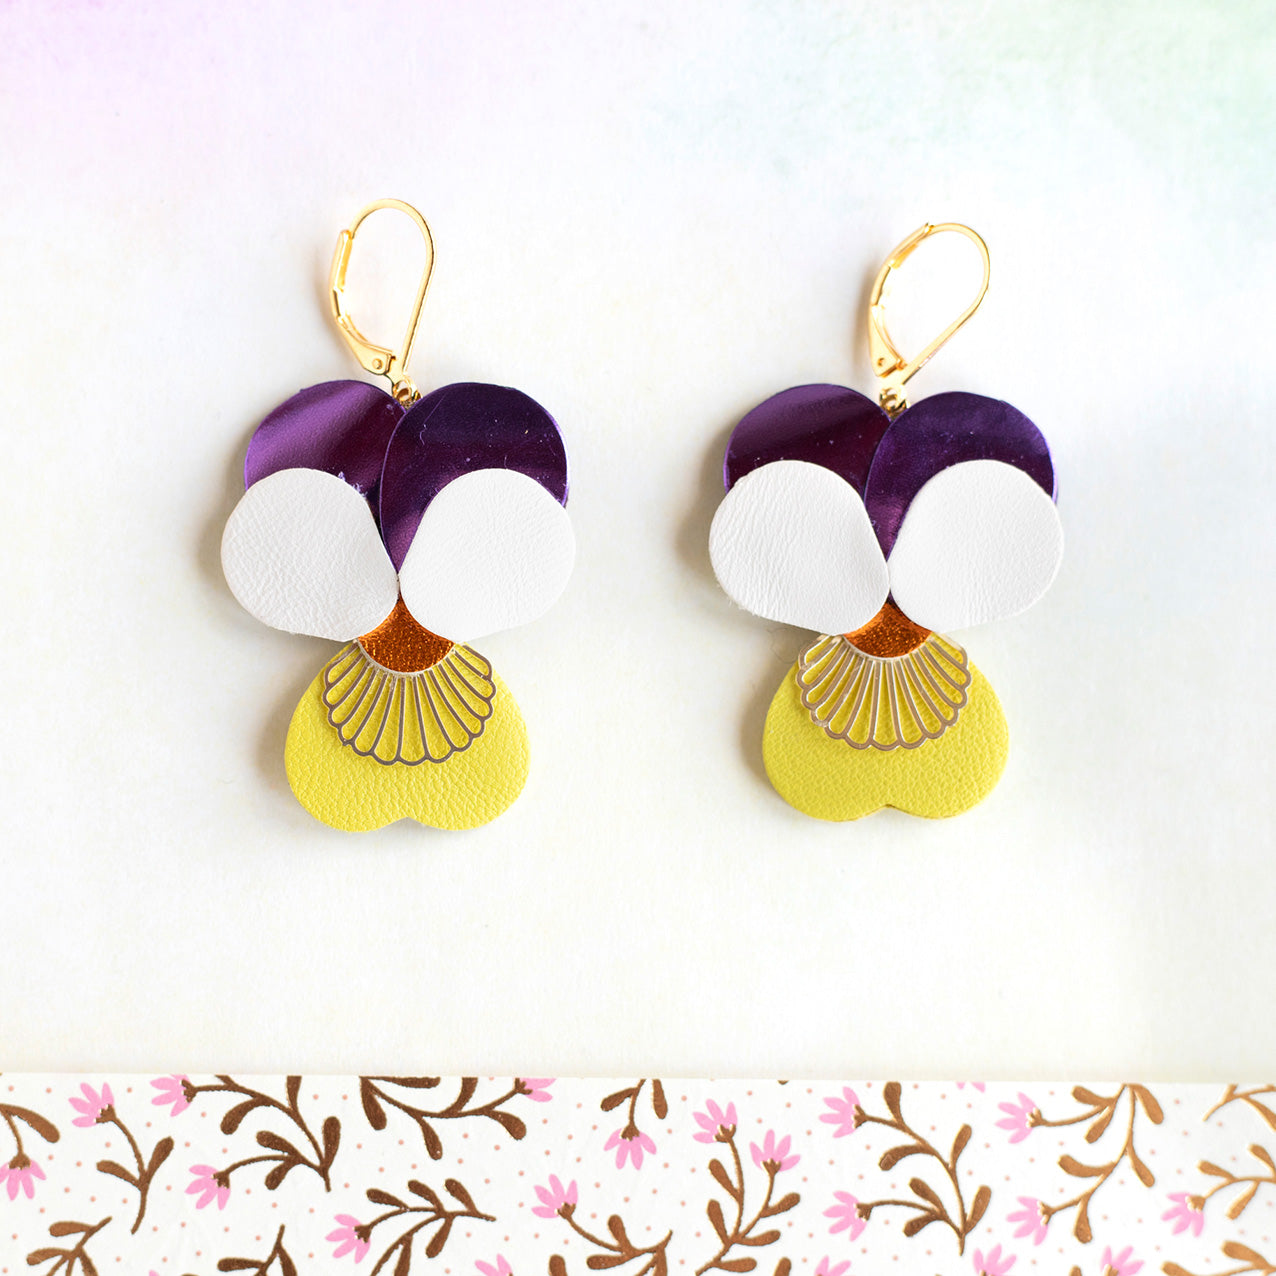 Pansies earrings - purple white and yellow